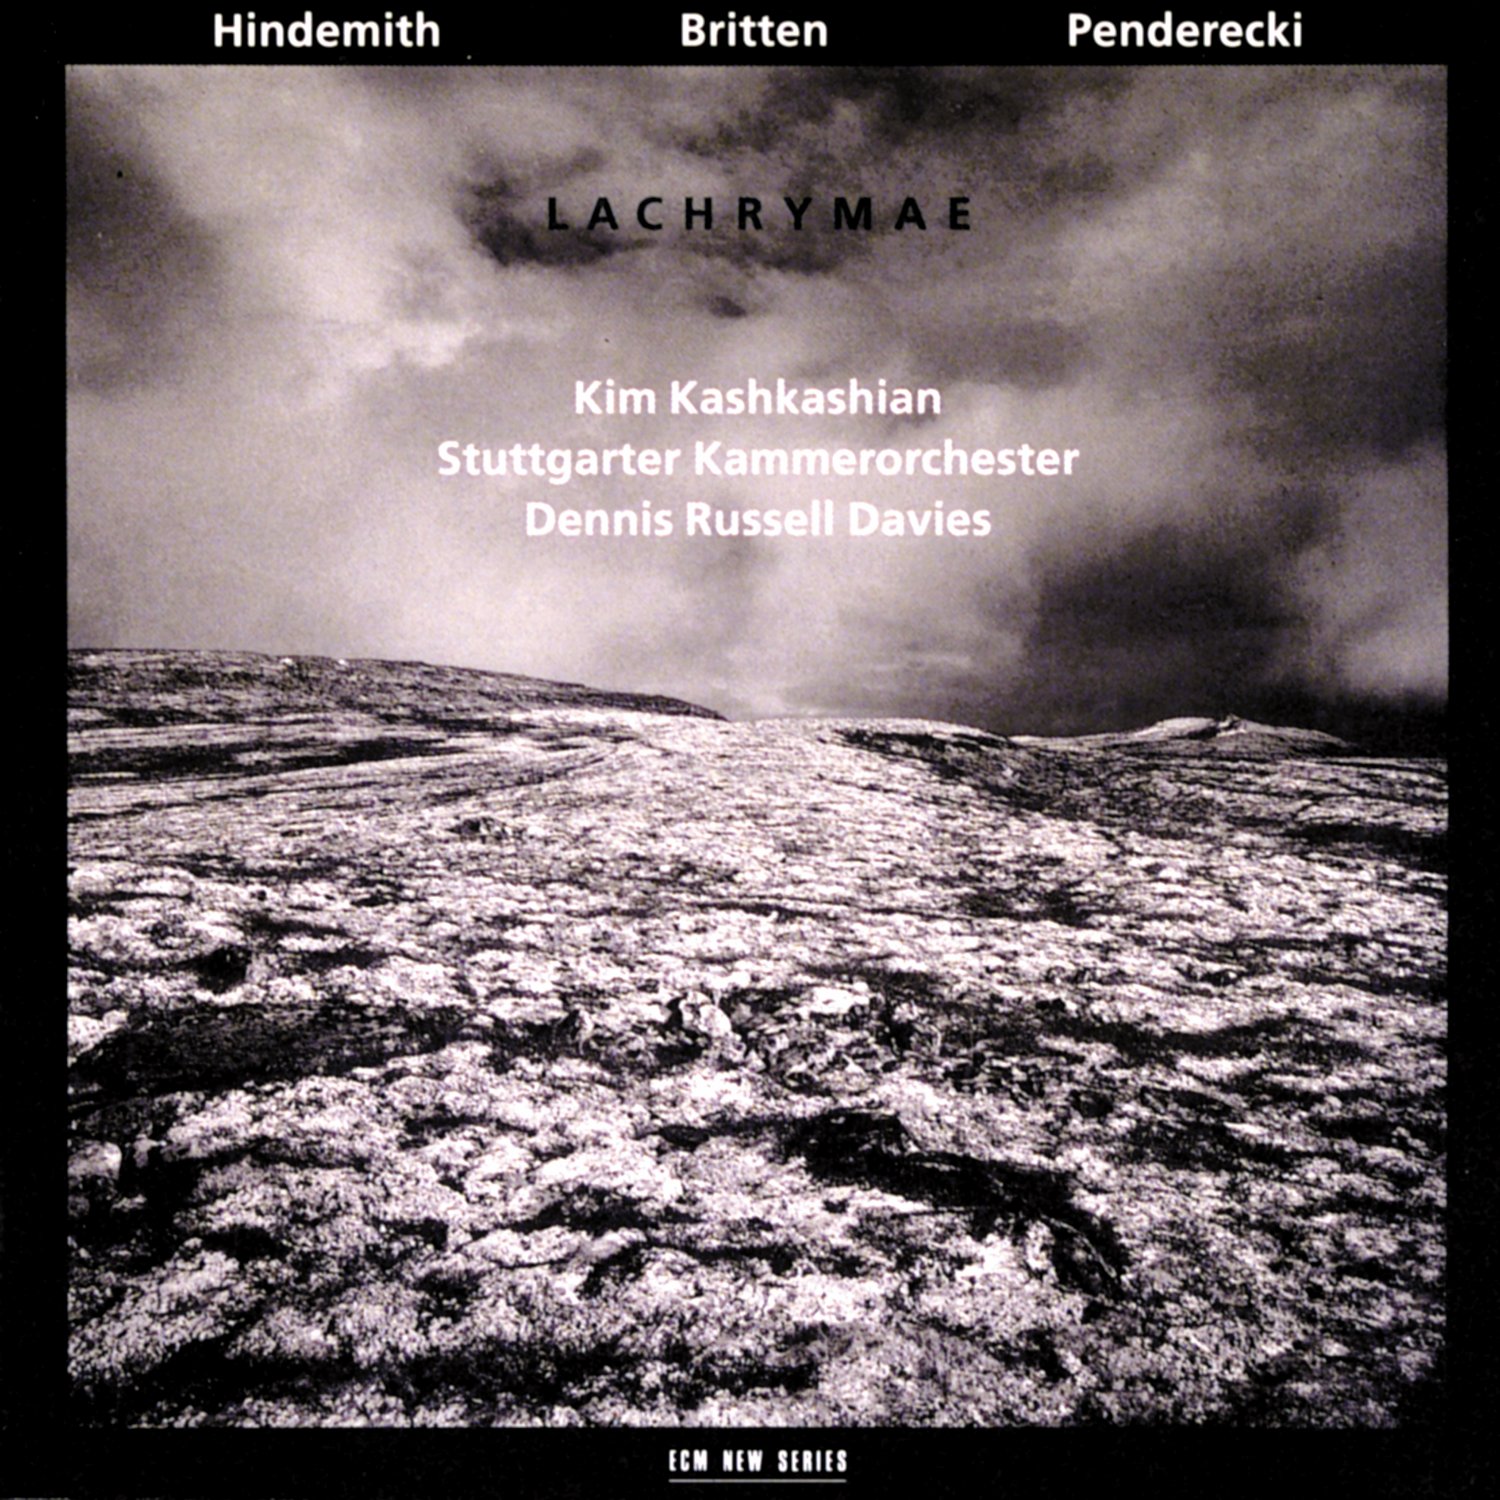 <p>Lachrymae<br />
Paul Hindemith/Trauermusik<br />
Benjamin Britten/Lachrymae op 48a<br />
Krzysztof Penderecki/Concerto for Viola<br />
and Chamber Orchestra</p>
